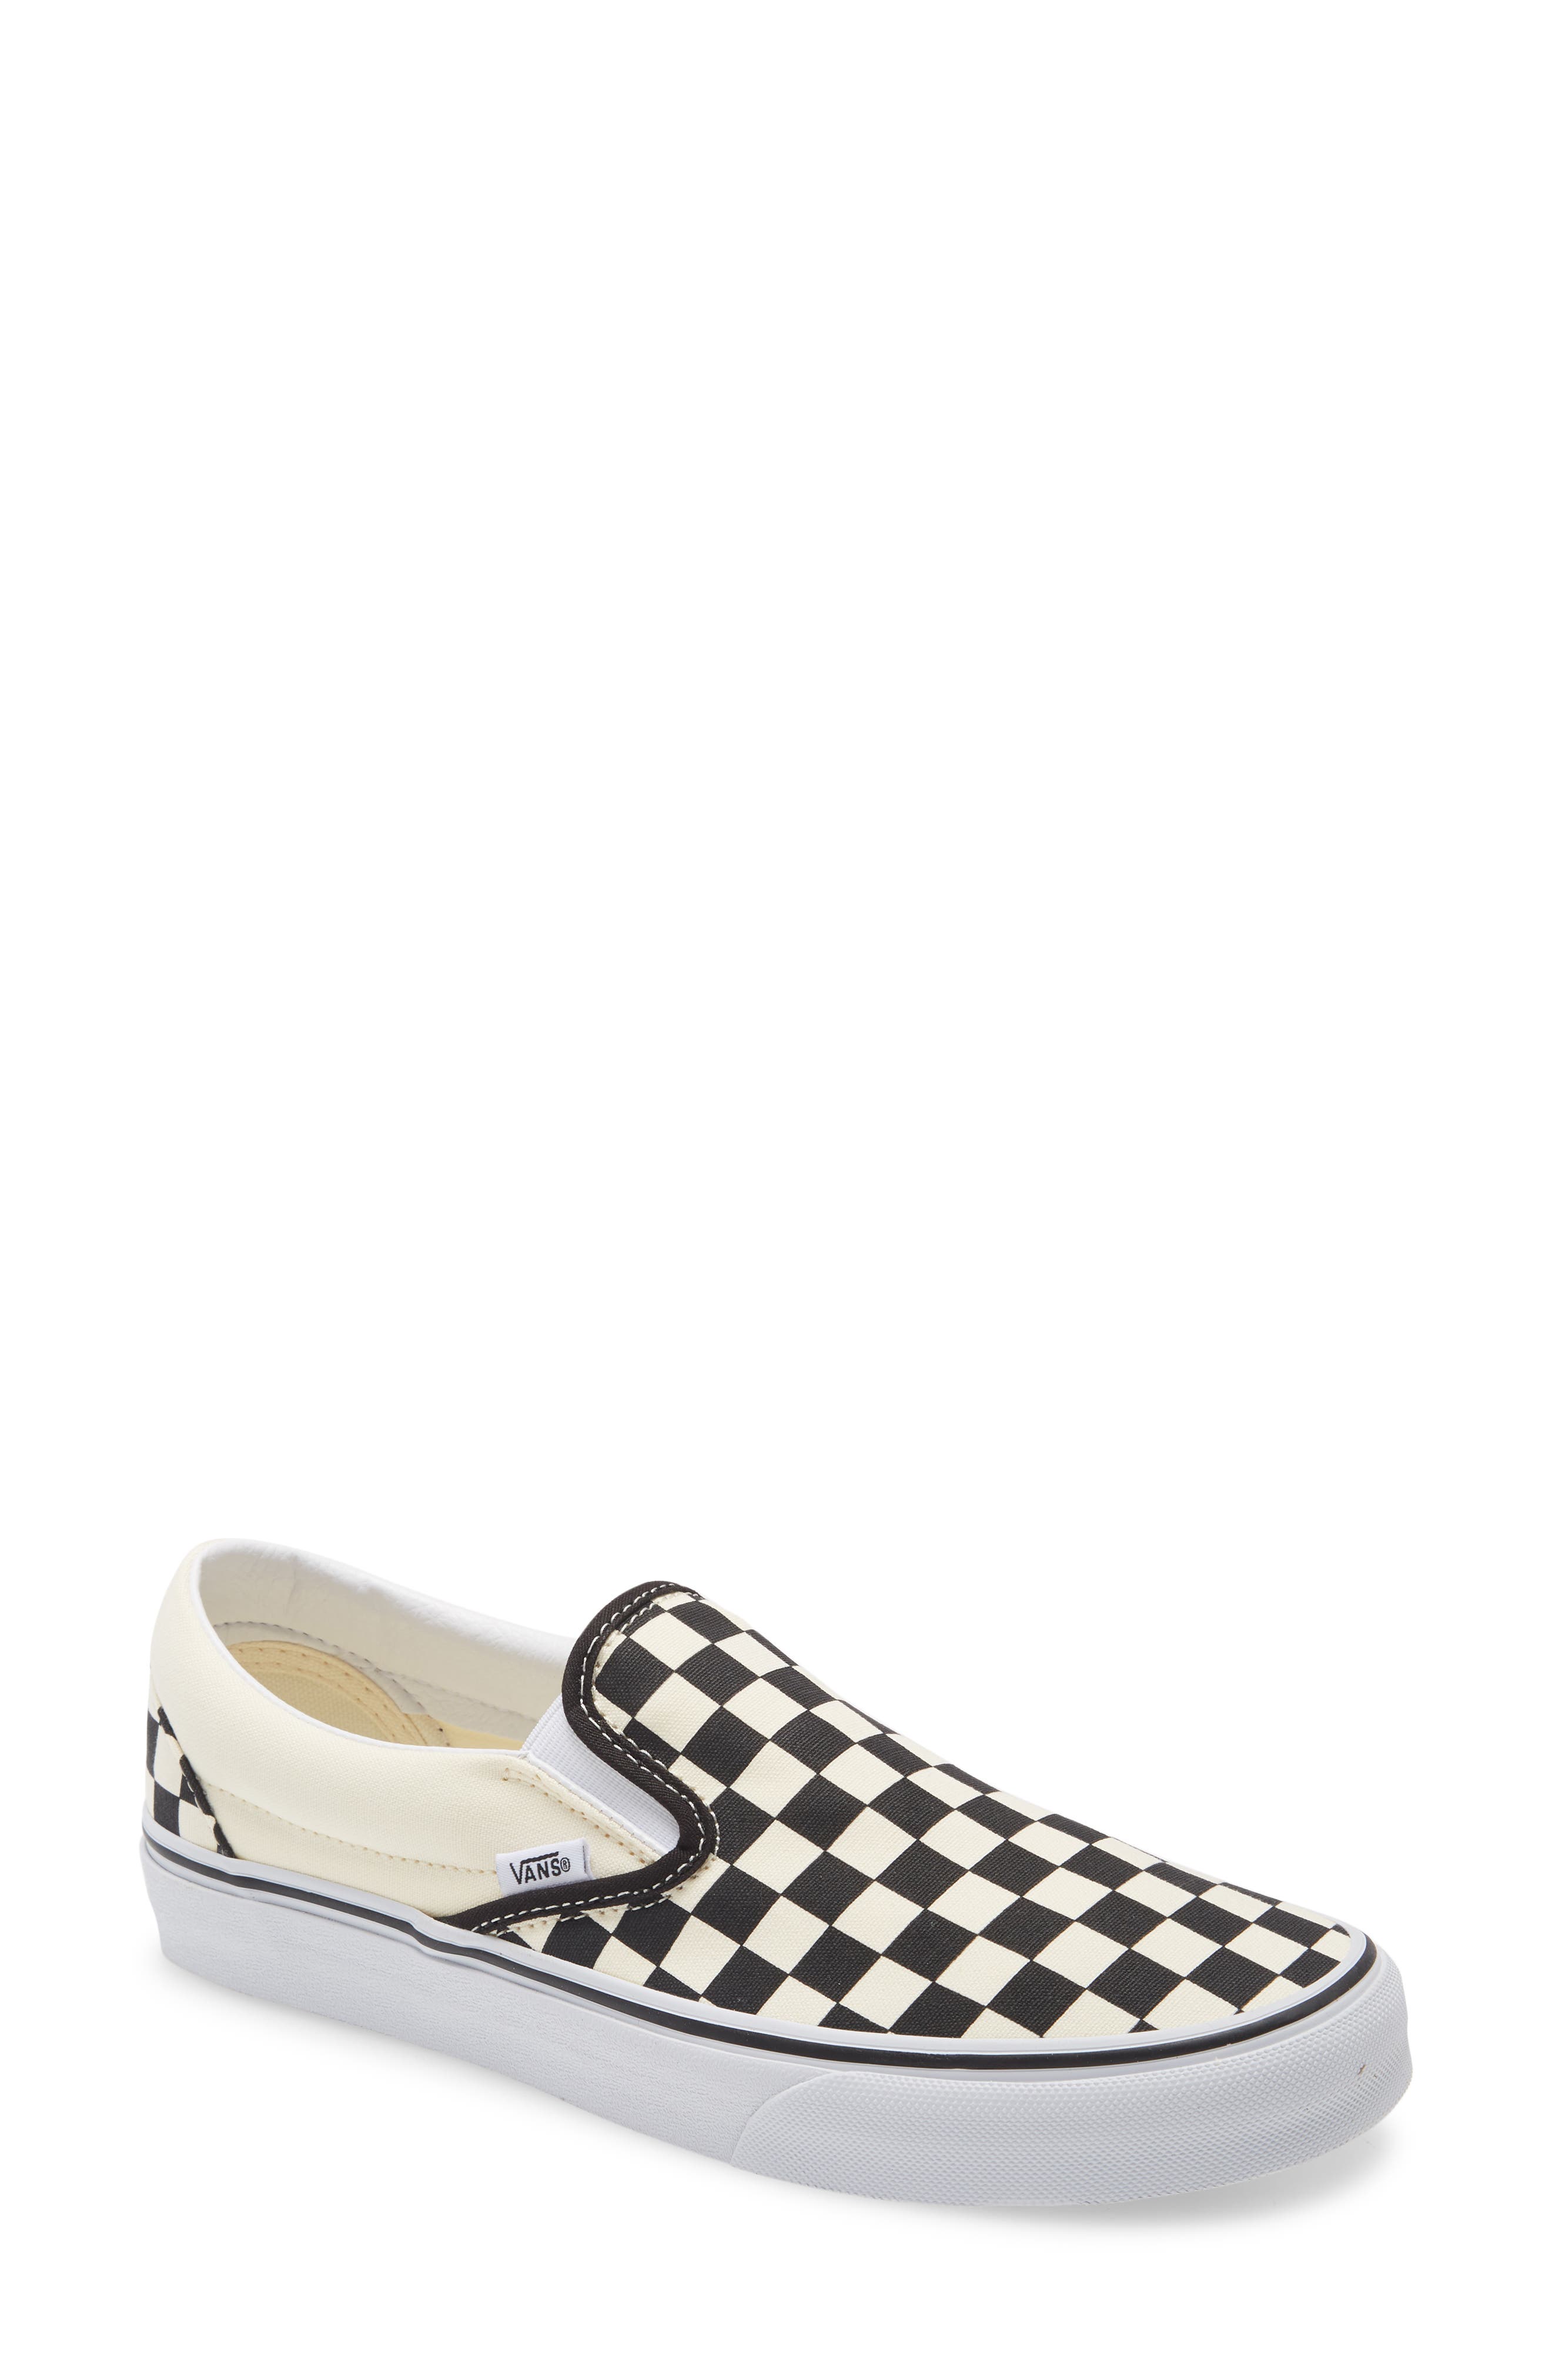 black and white checkered van shoes